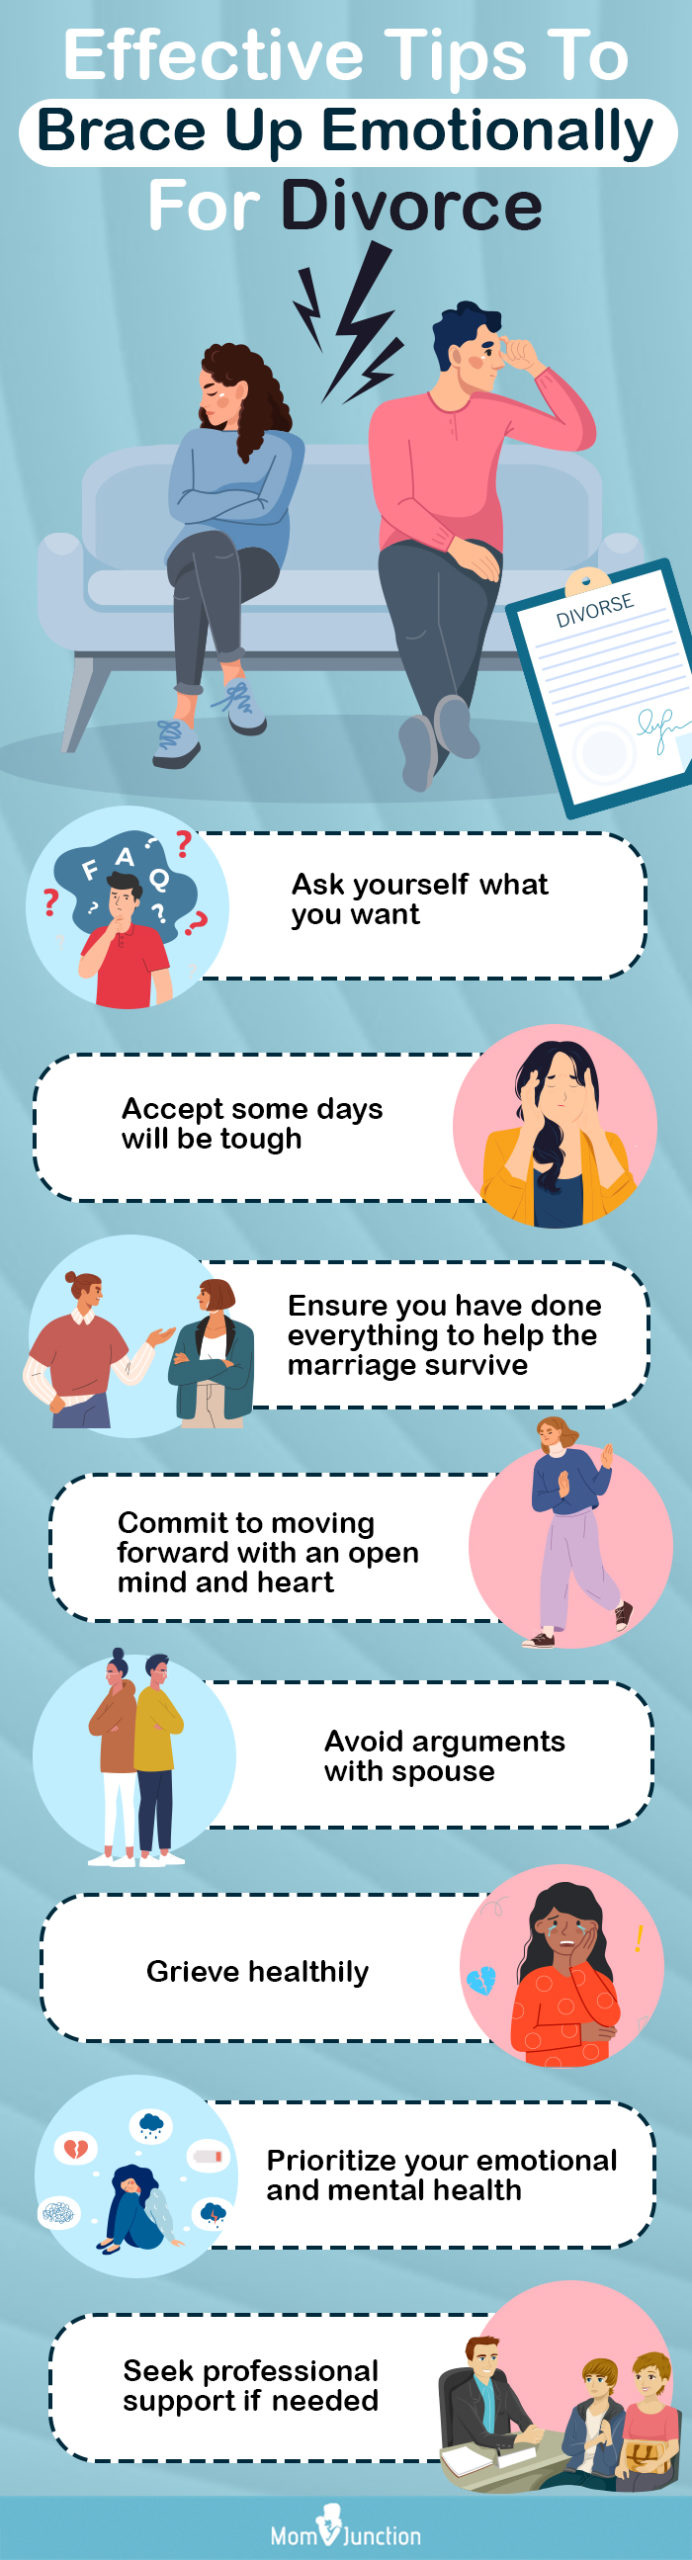 tips to brace up emotionally for divorce (infographic)